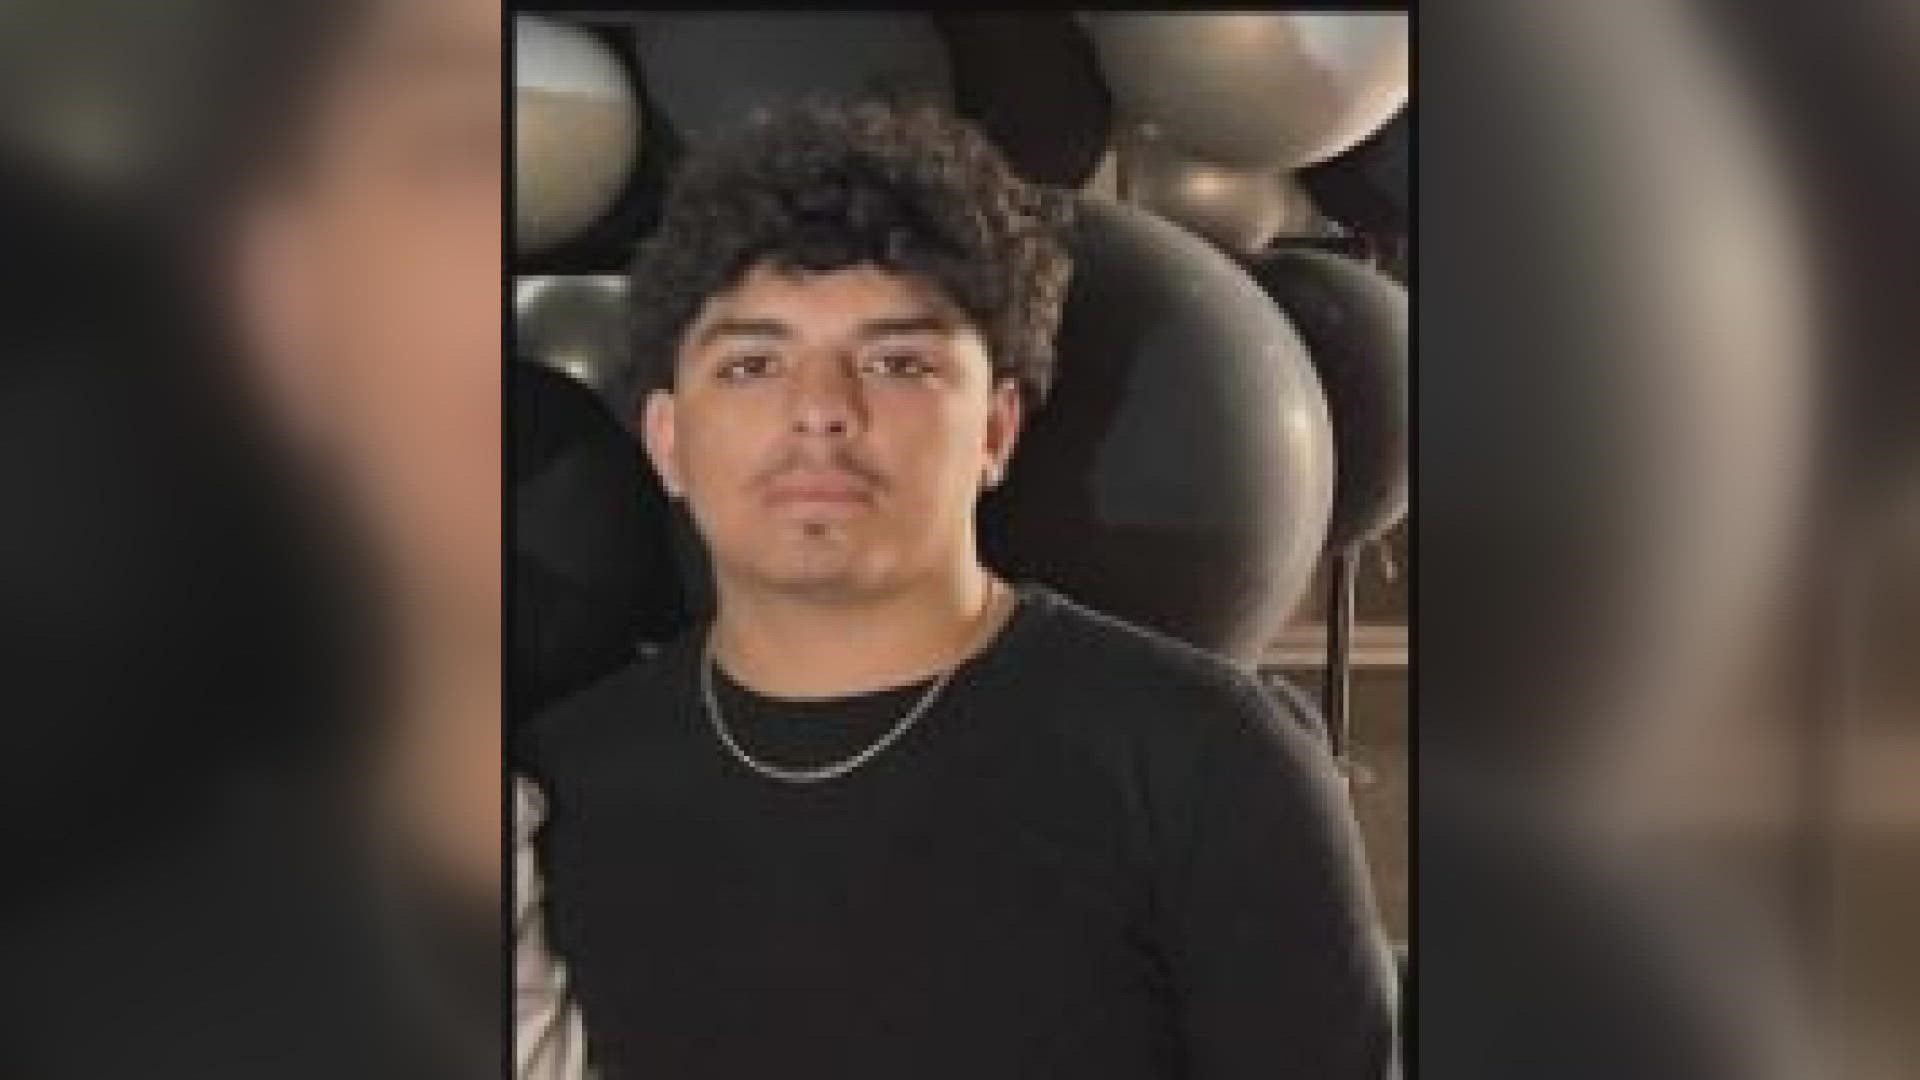 On Wednesday, Phoenix police announced that the remains of 17-year-old Jesse Sainz-Camacho were found in a rural area in Maricopa County.